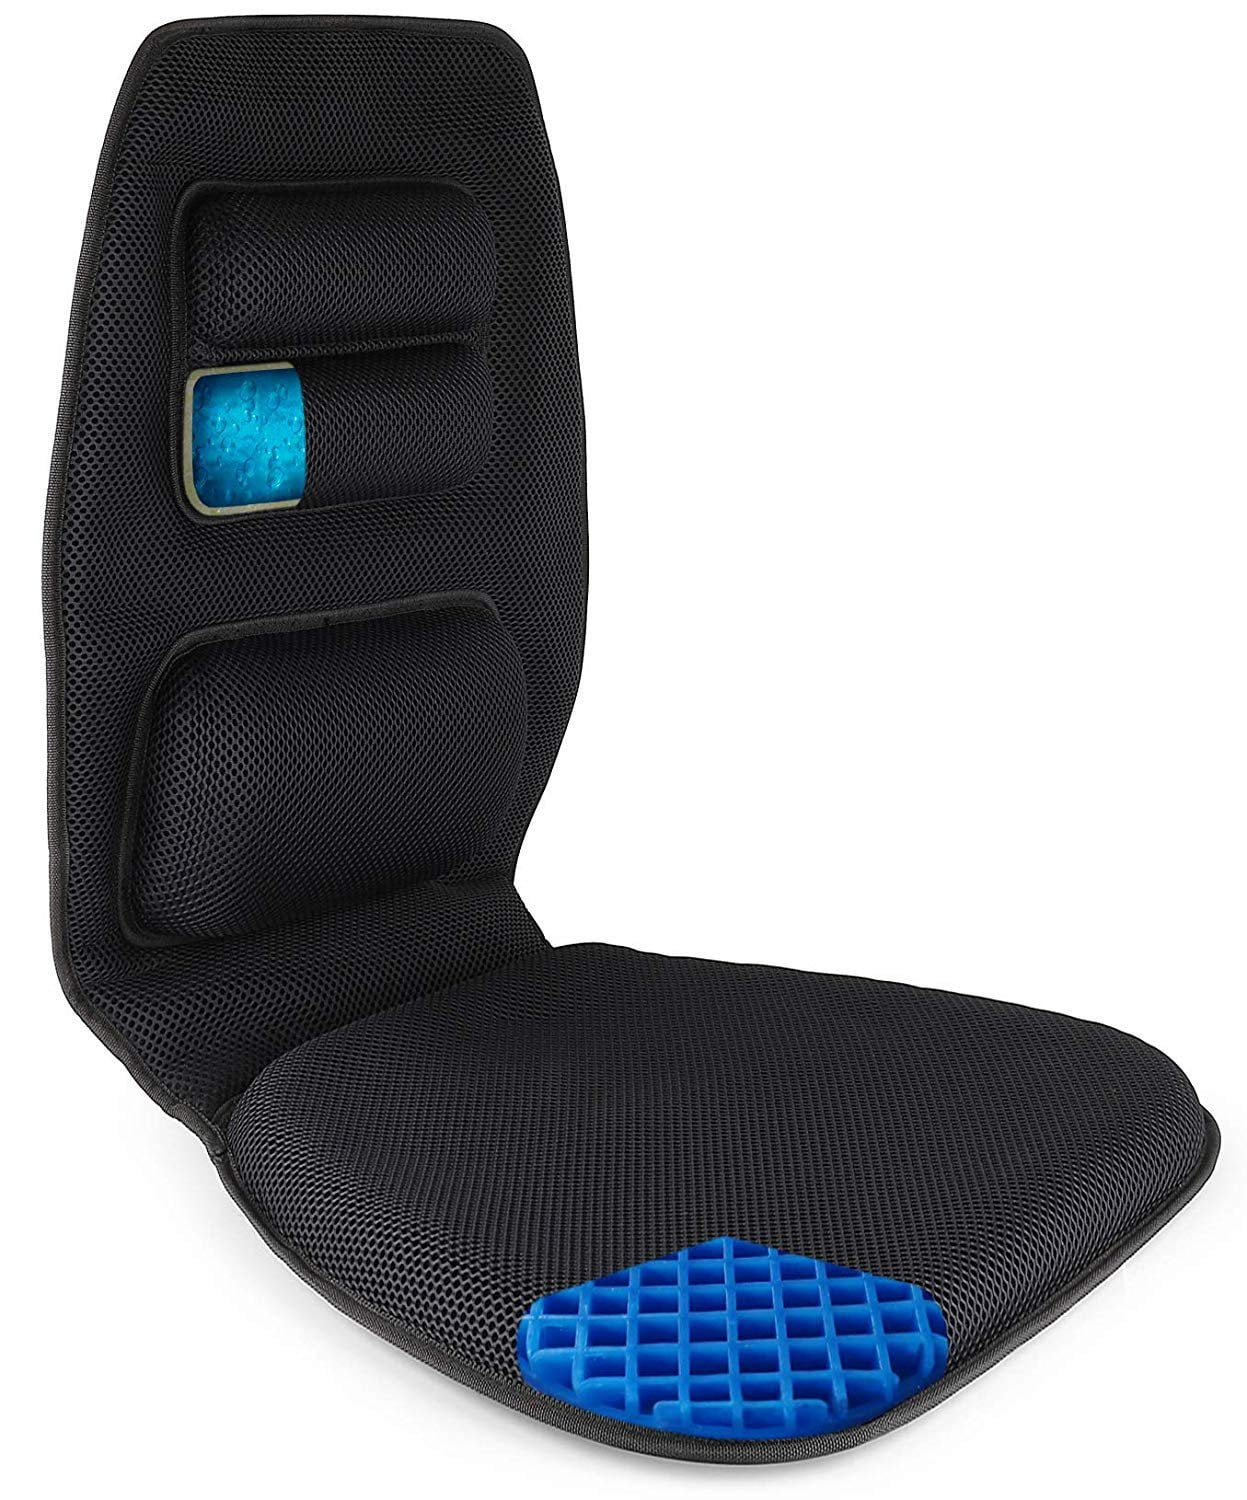 YSLYGHY Car Seat Cushion Pad for Car Driver Seat Office Chair Home